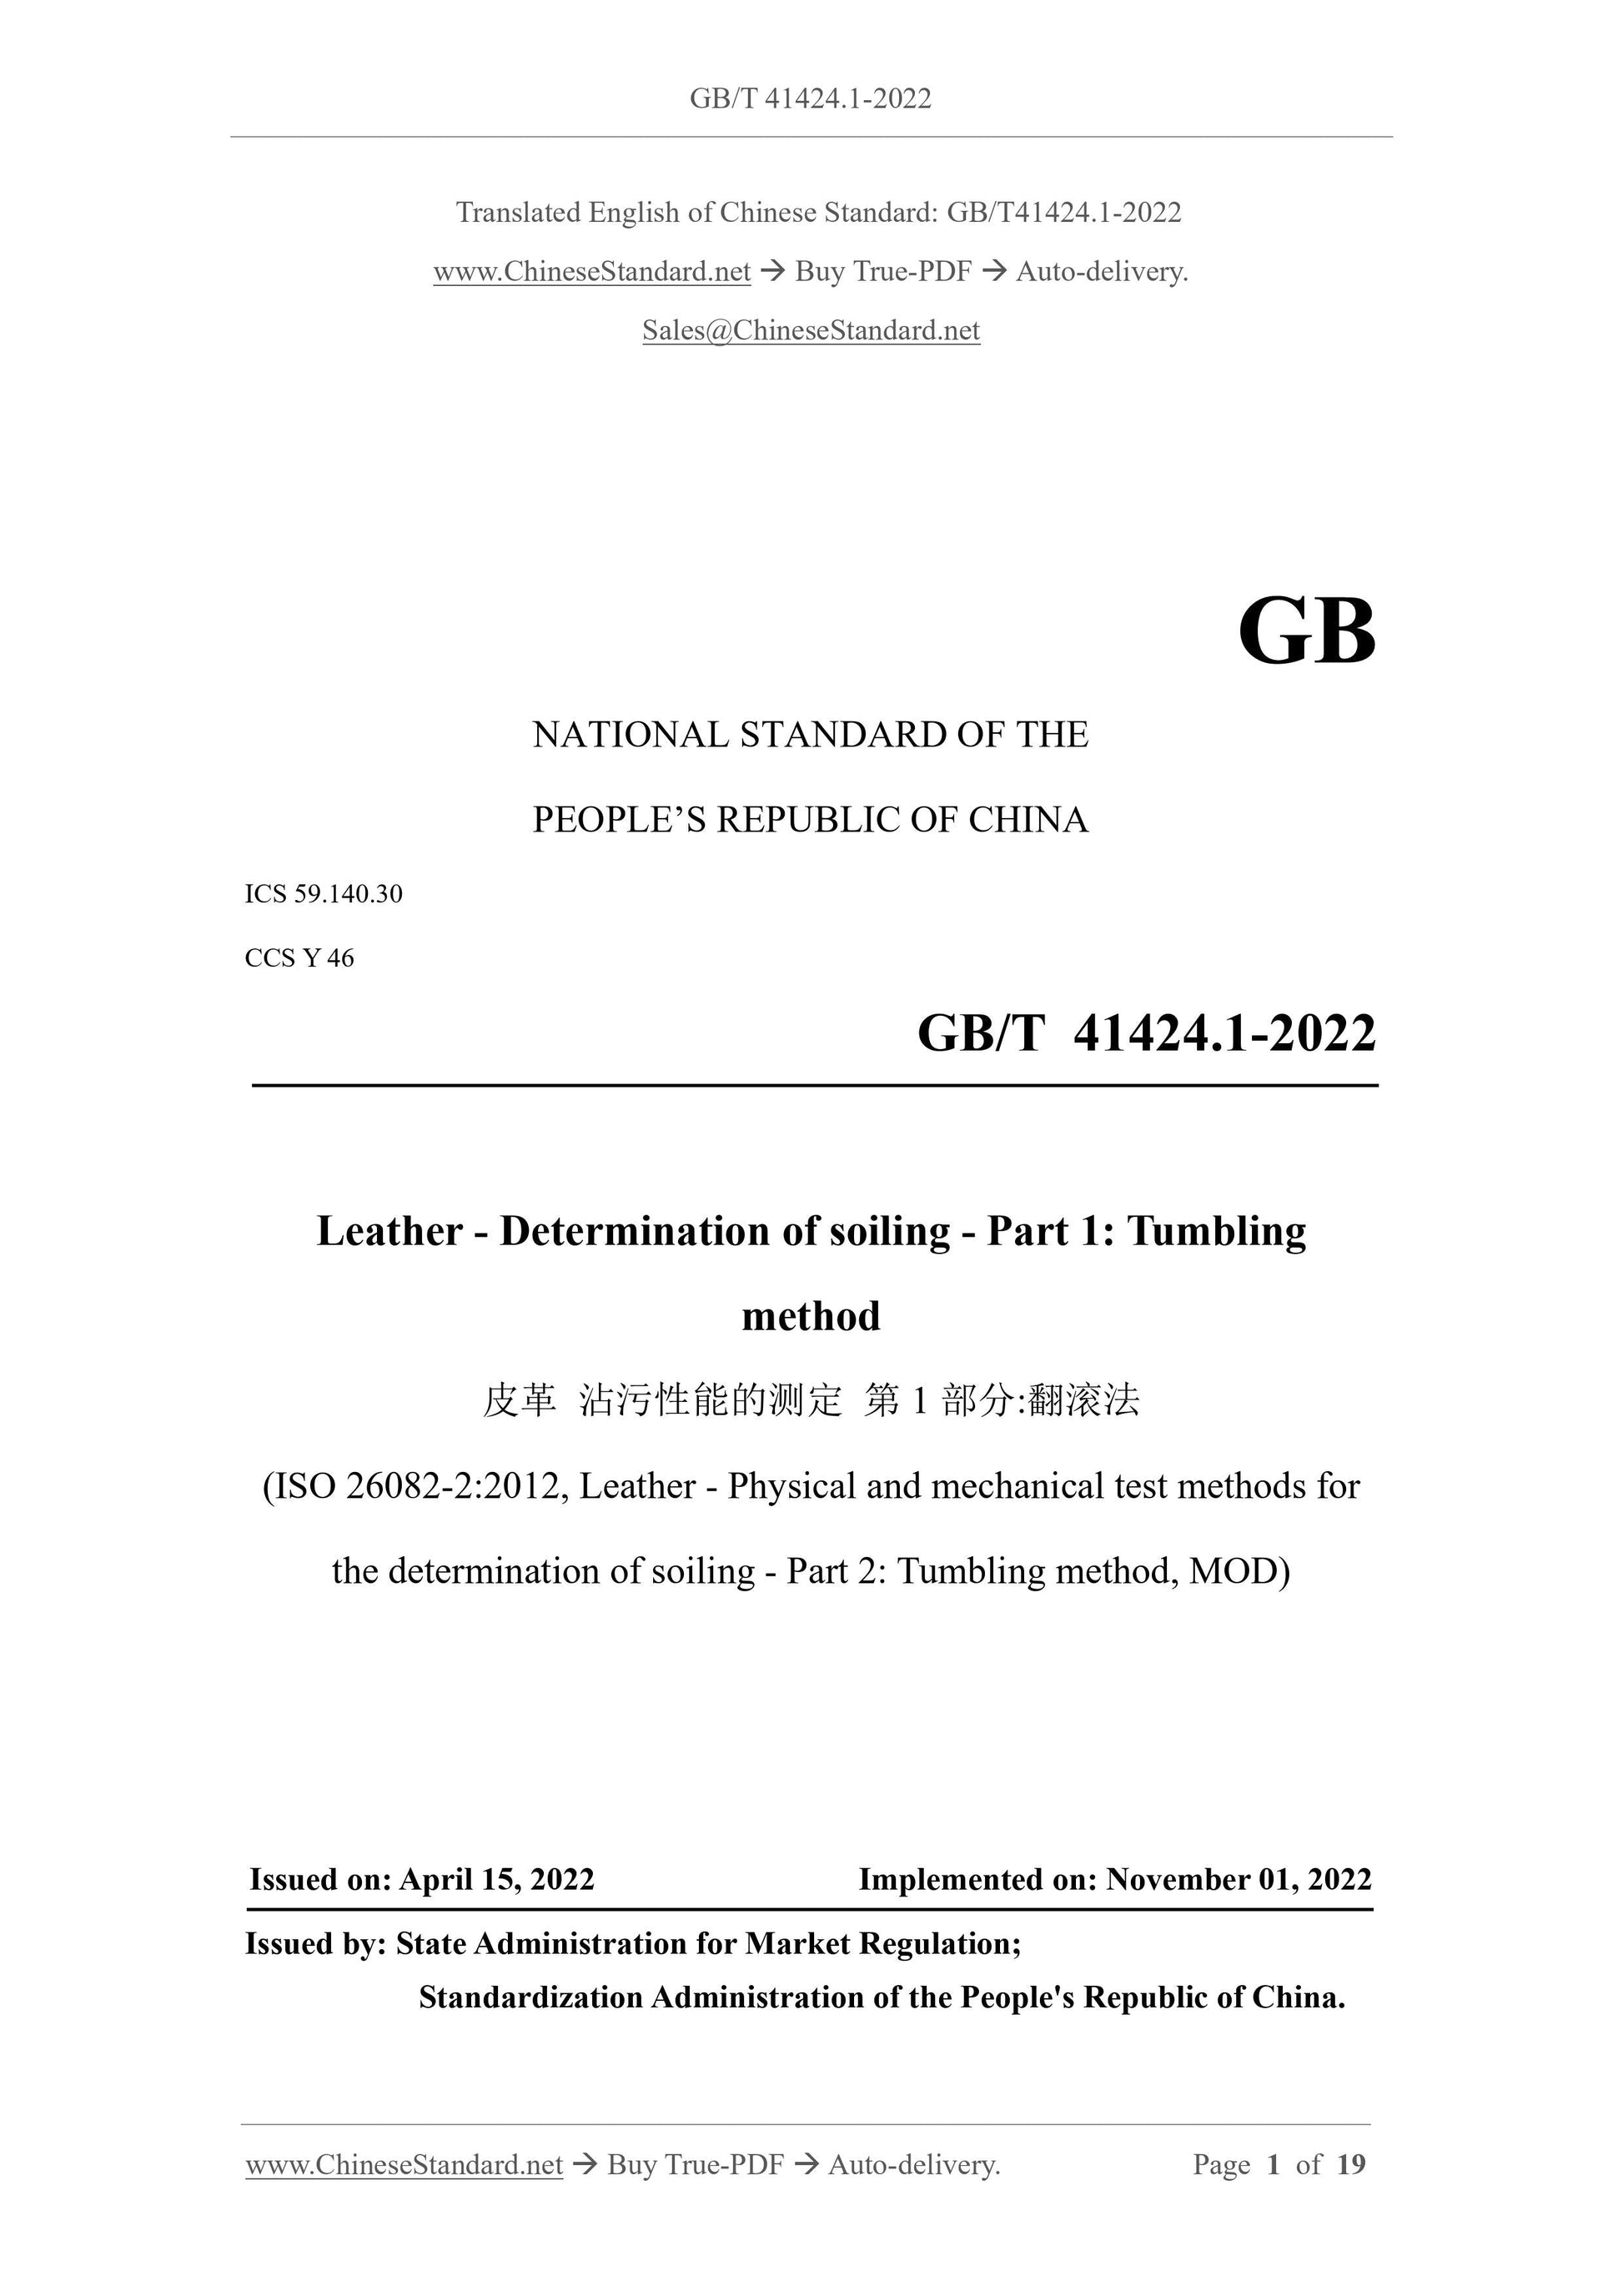 GB/T 41424.1-2022 Page 1